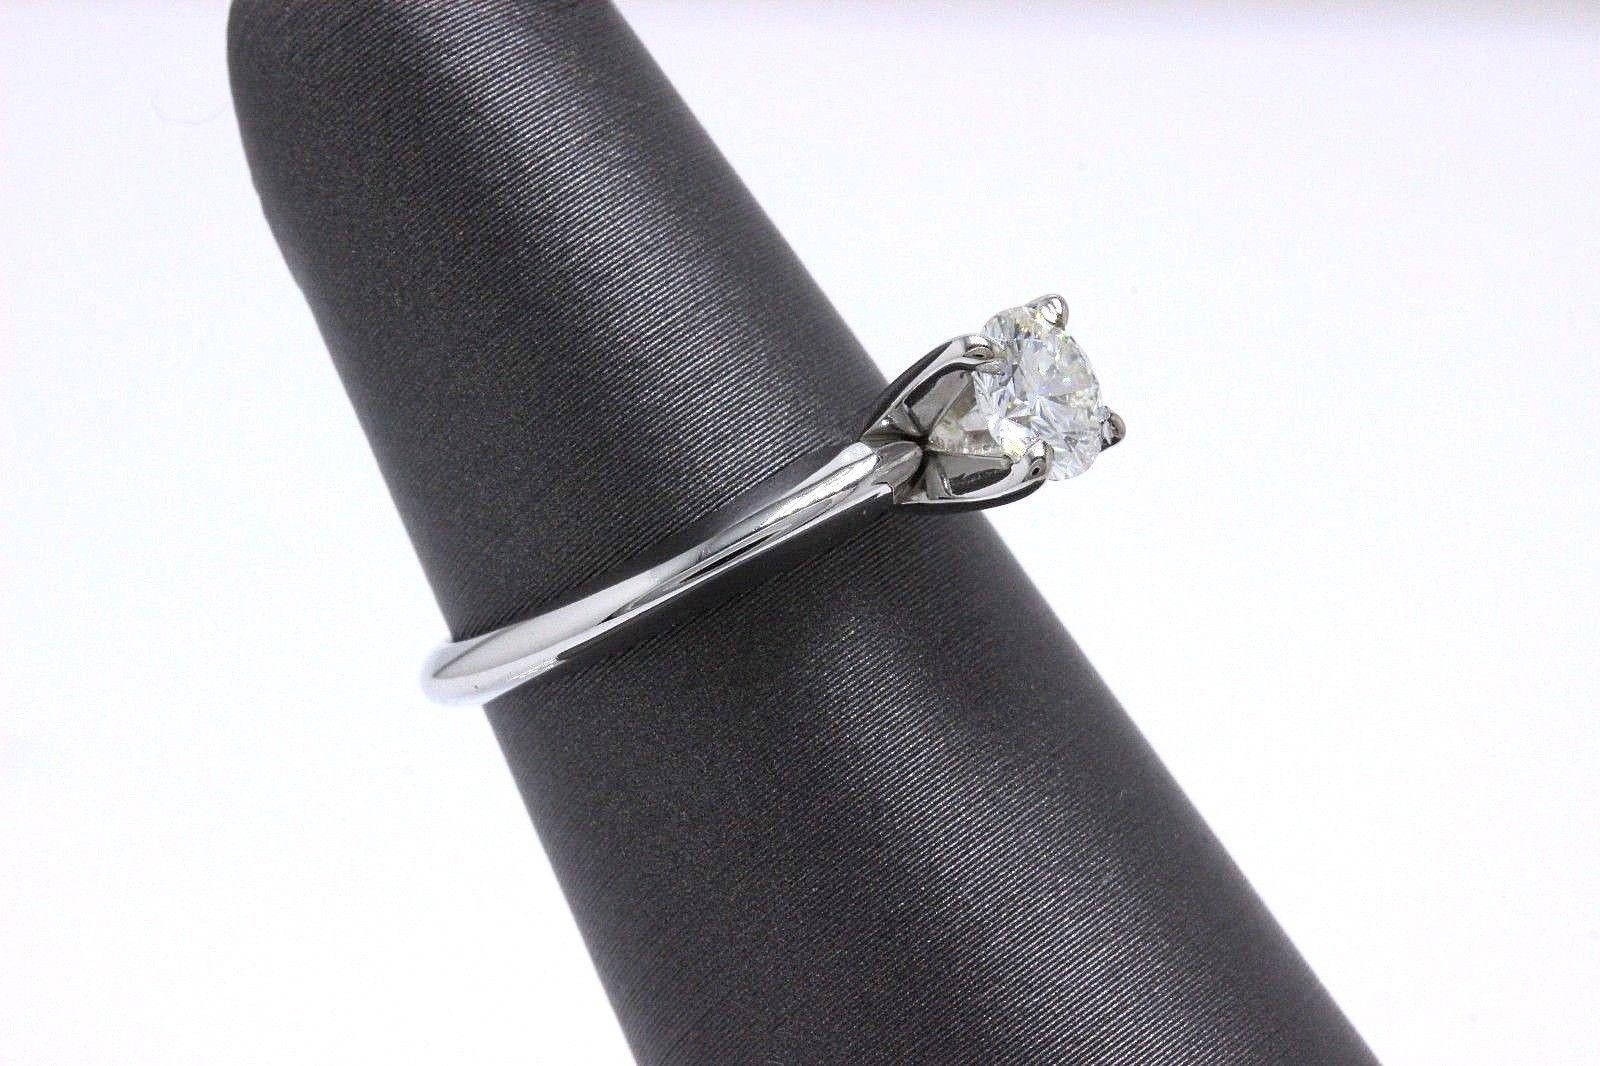 Leo Round Brilliant Diamond Engagement Ring 0.51 CTS I SI1 14K White Gold Papers For Sale 1